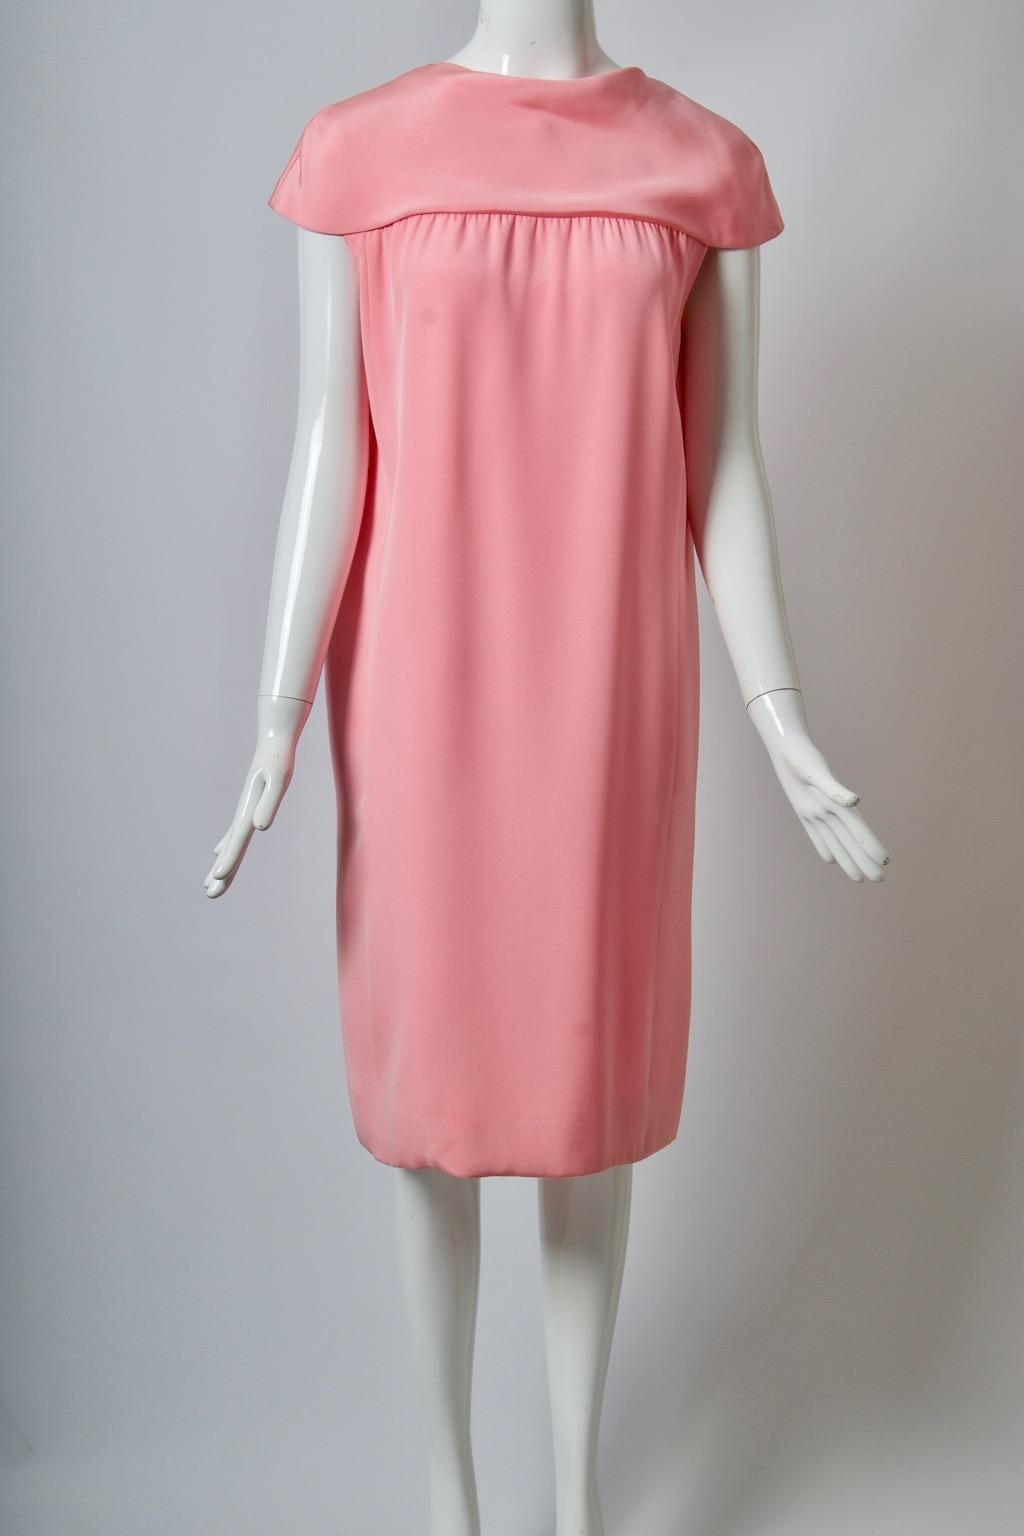 1960s medium-weight silk shift dress in a beautiful shade of pink. The construction features a yoke at top that extends over the shoulders to form cap sleeves. The simple straight shape below has slight gathers under the yoke, hidden pockets in the